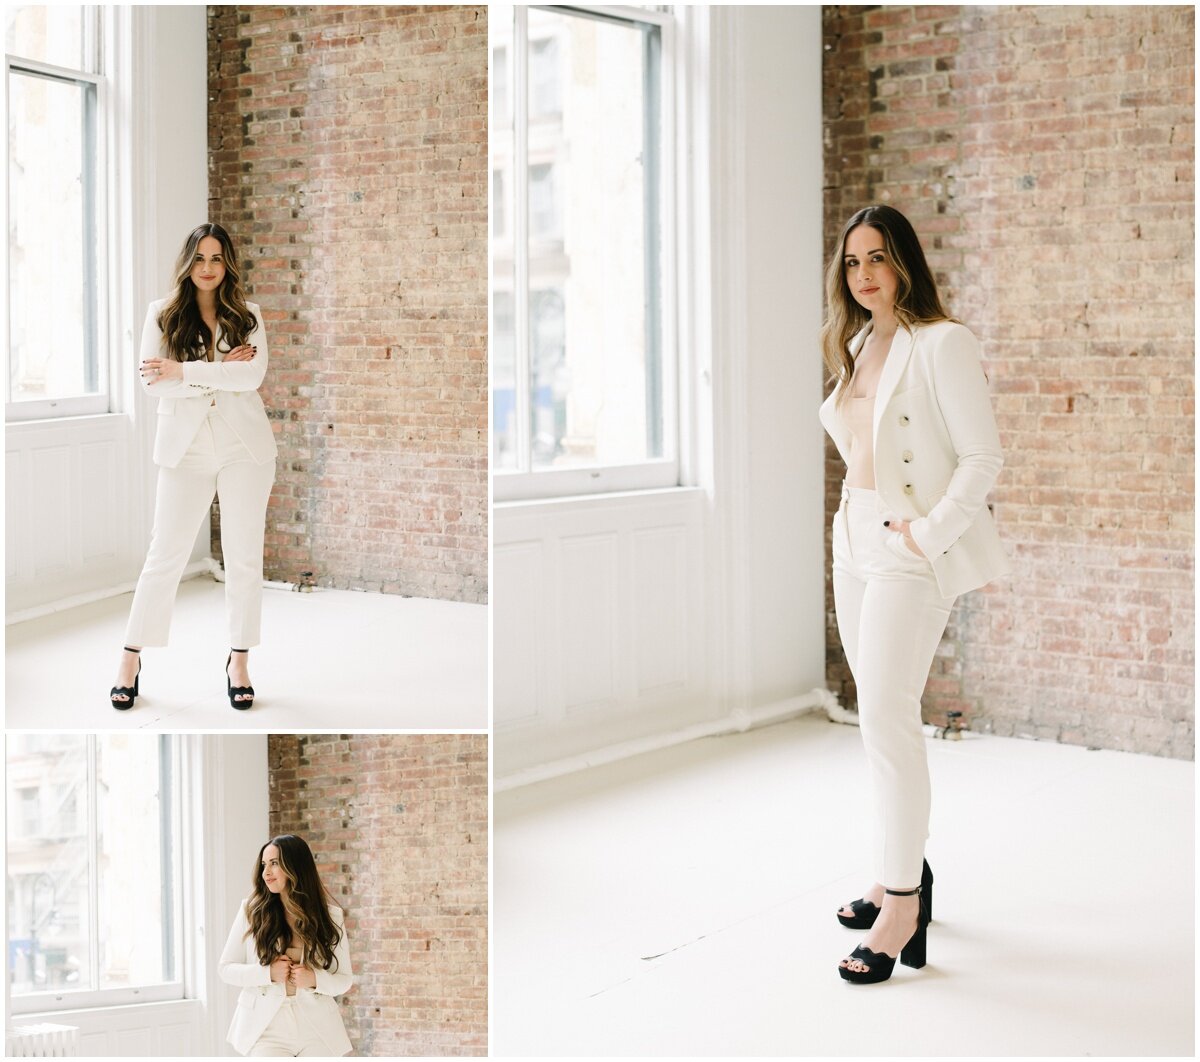  Collage of portraits, women in white with exposed brick wall as backdrop  